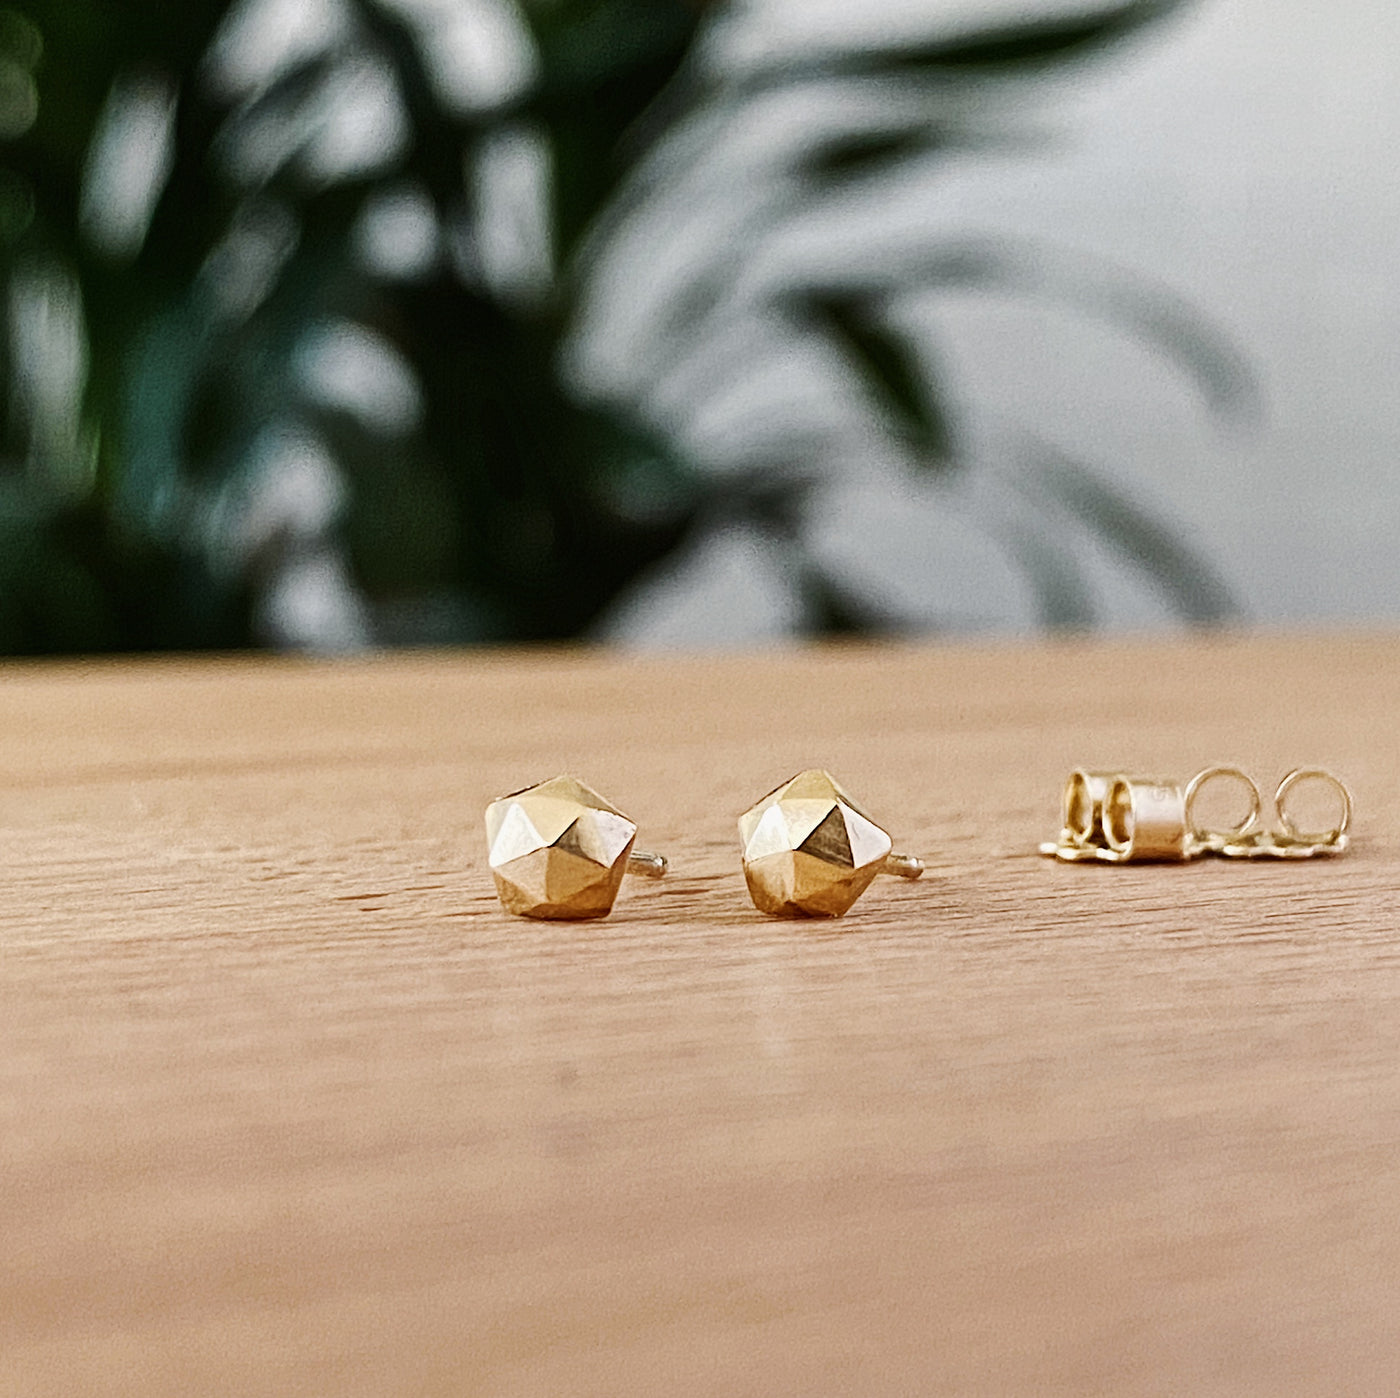 Micro Fragment small faceted stud earrings in gold vermeil by Corey Egan